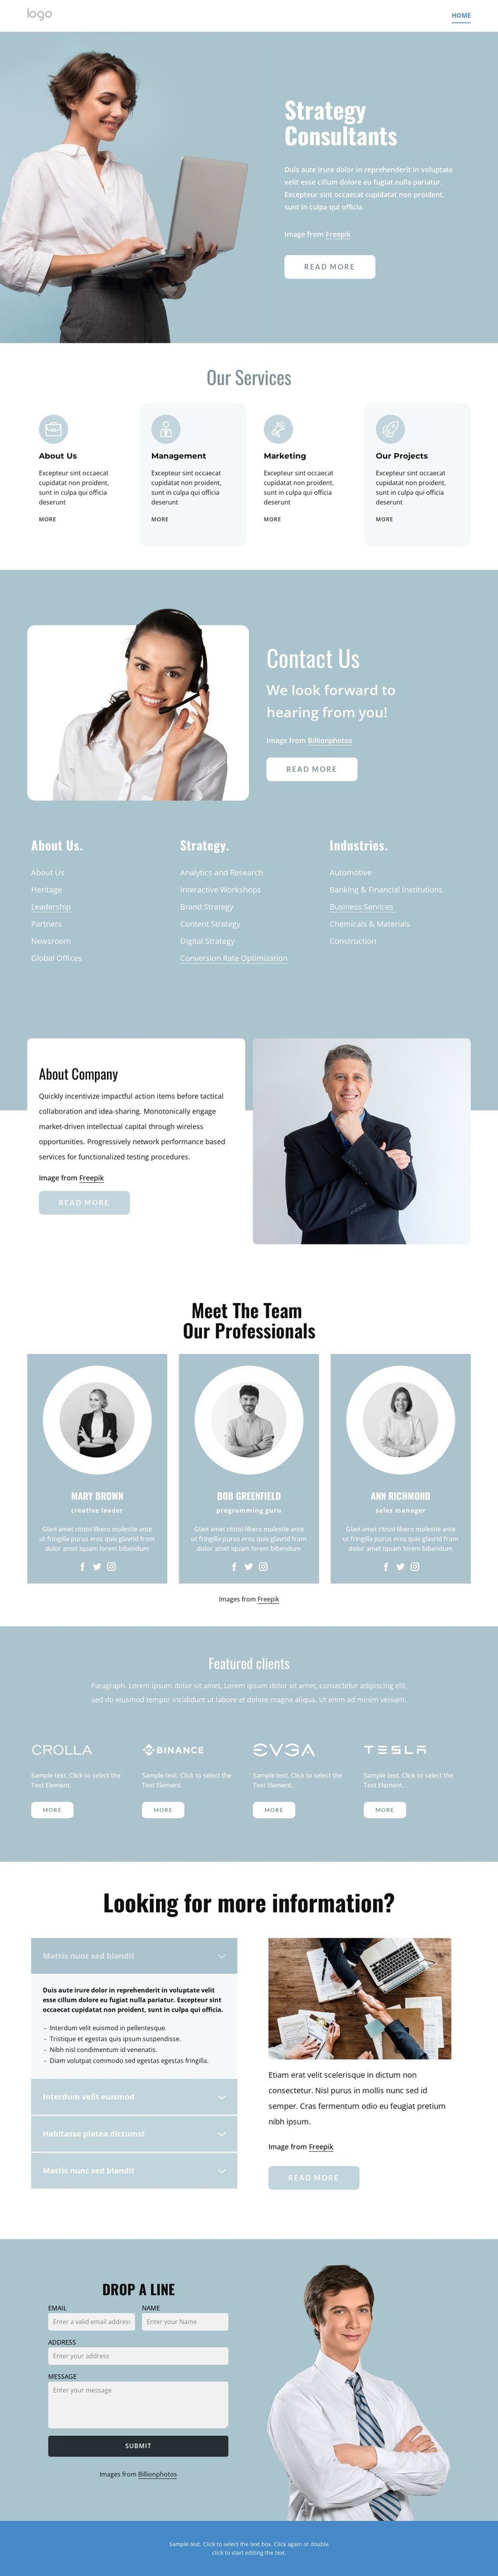 Strategy connsultants Homepage Design